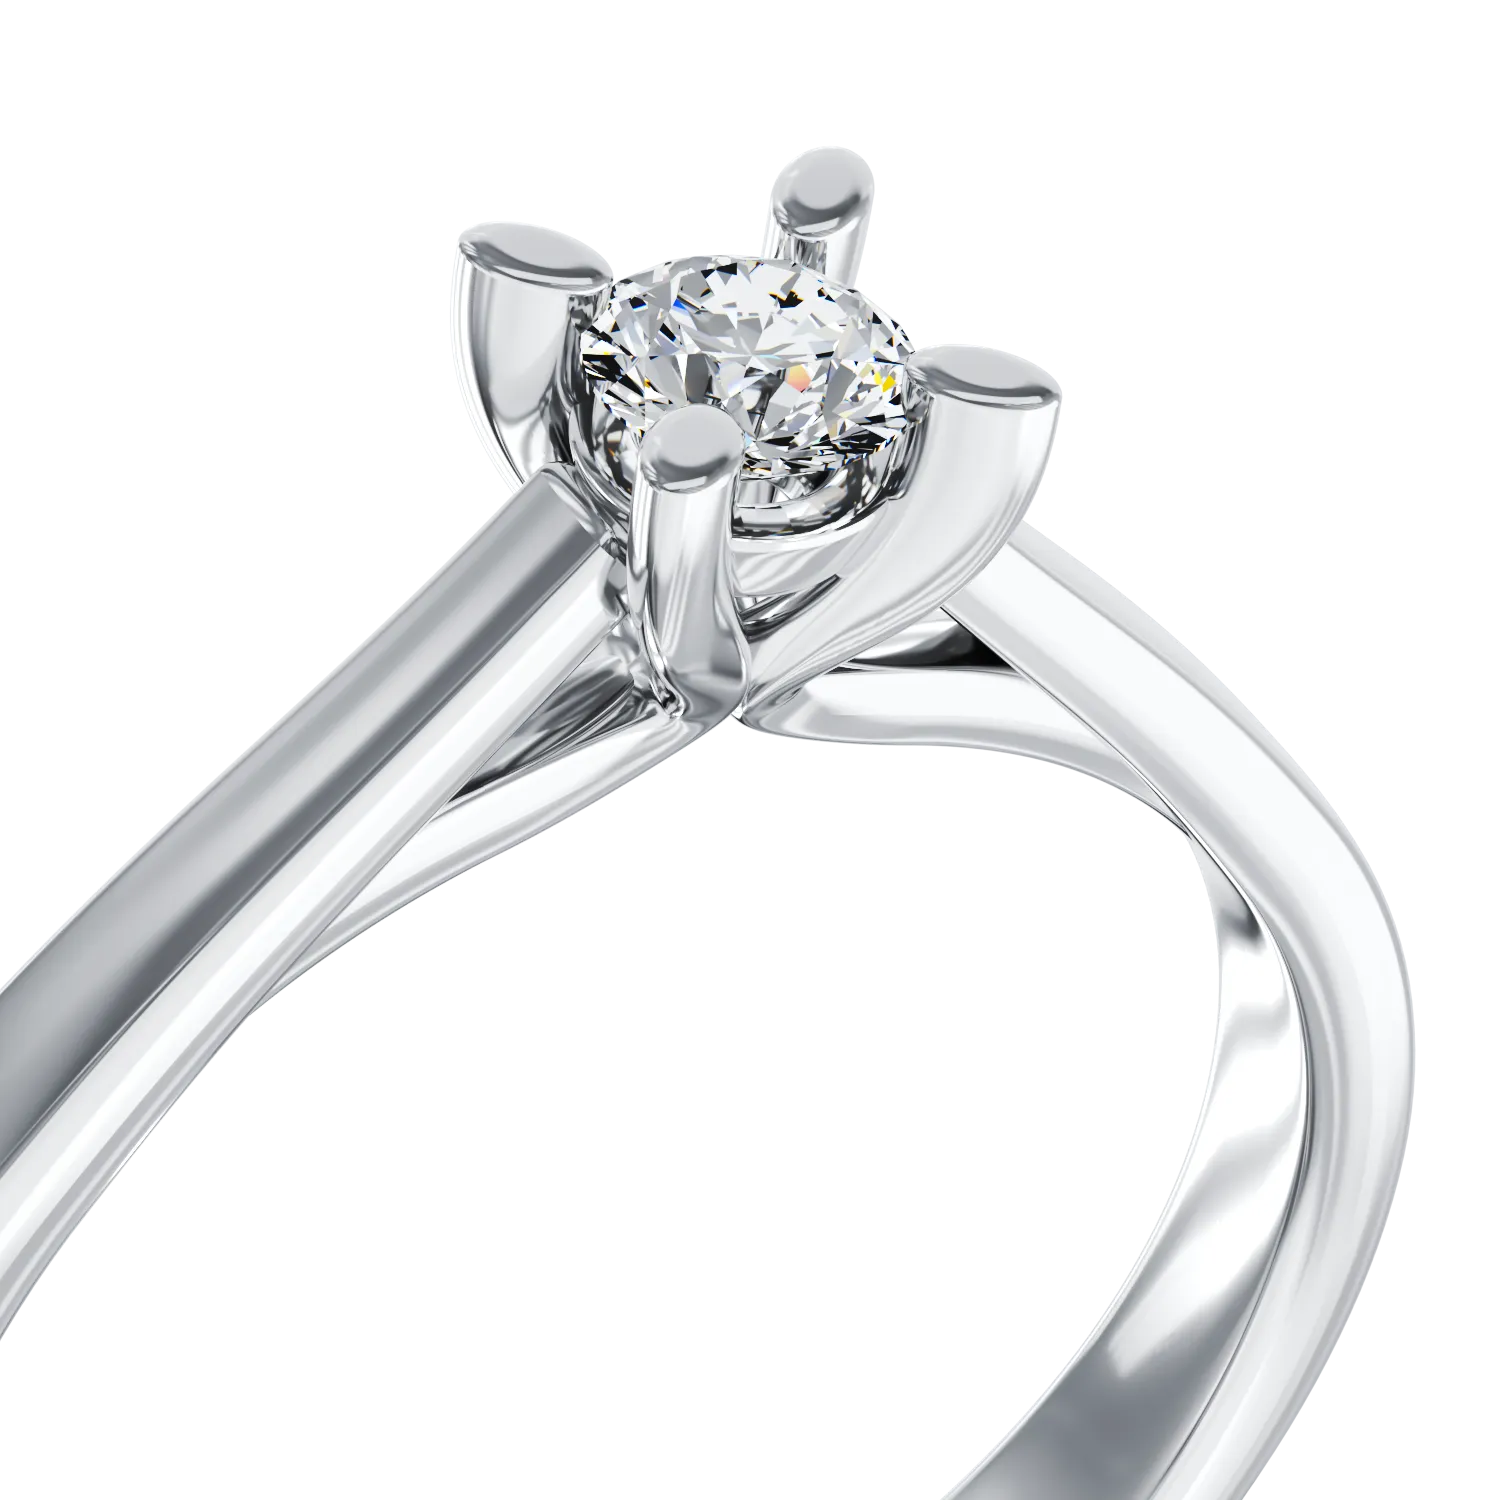 14K white gold engagement ring with a 0.10ct solitaire diamond